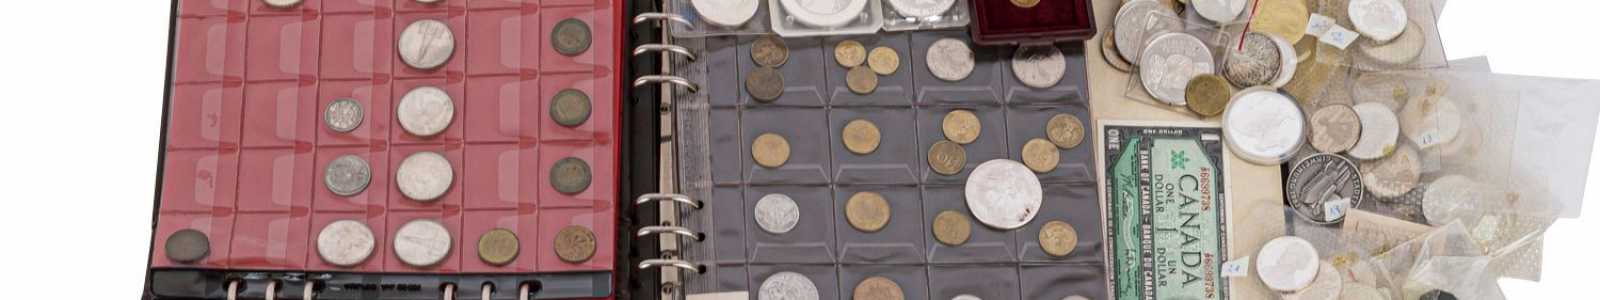 Coins, medals, stamps, history